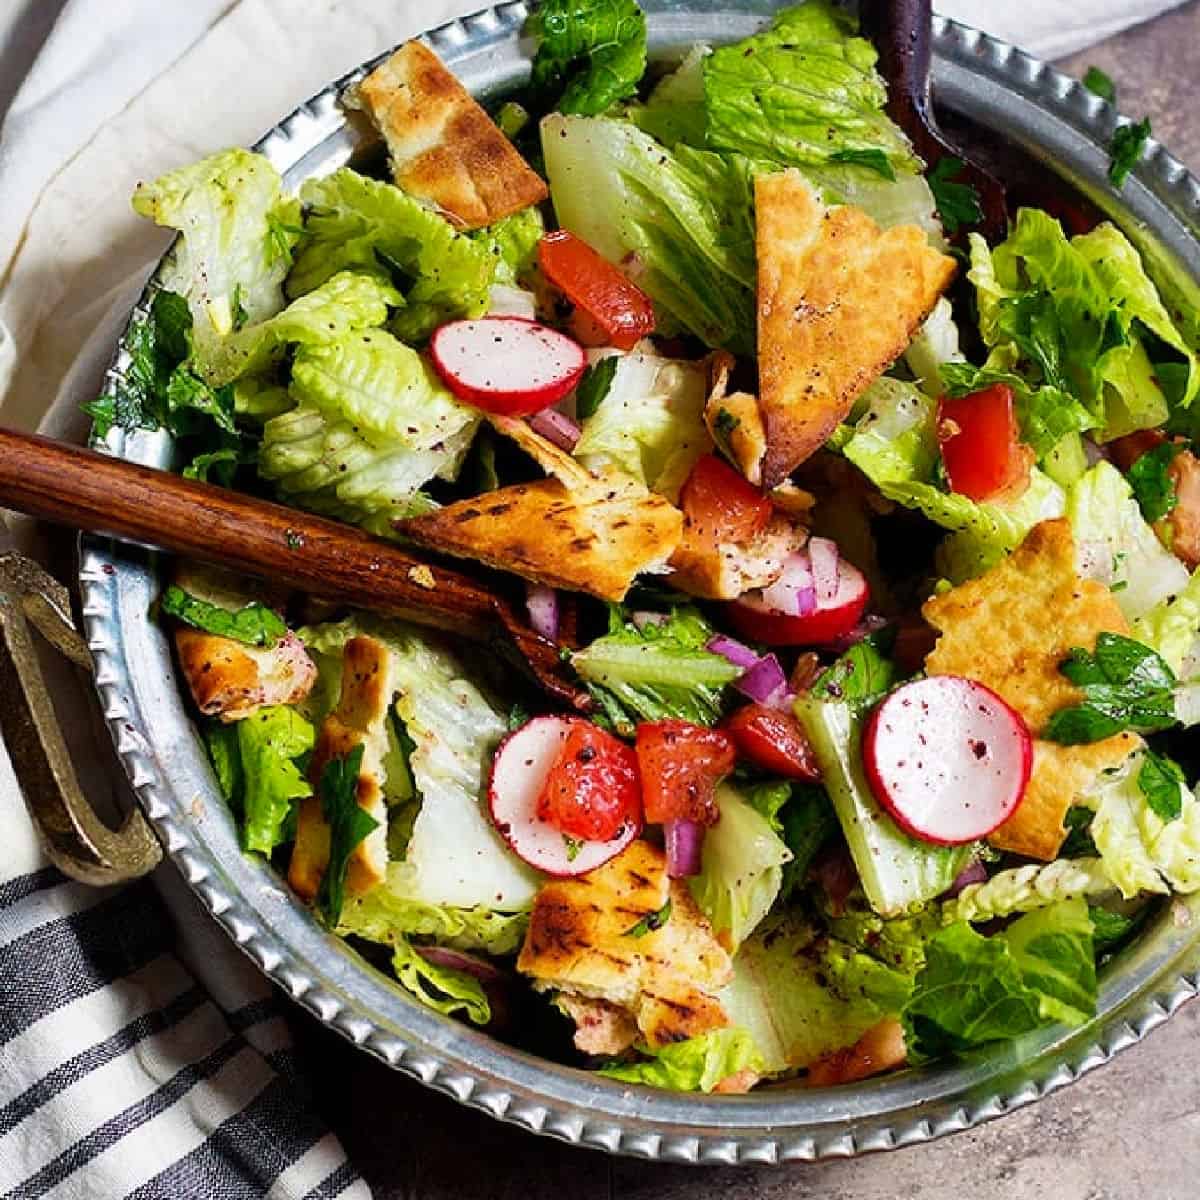 This authentic Lebanese fattoush salad is a Middle Eastern classic. Fresh chopped salad is flavored with crispy toasted pita and a bright, zesty dressing.
